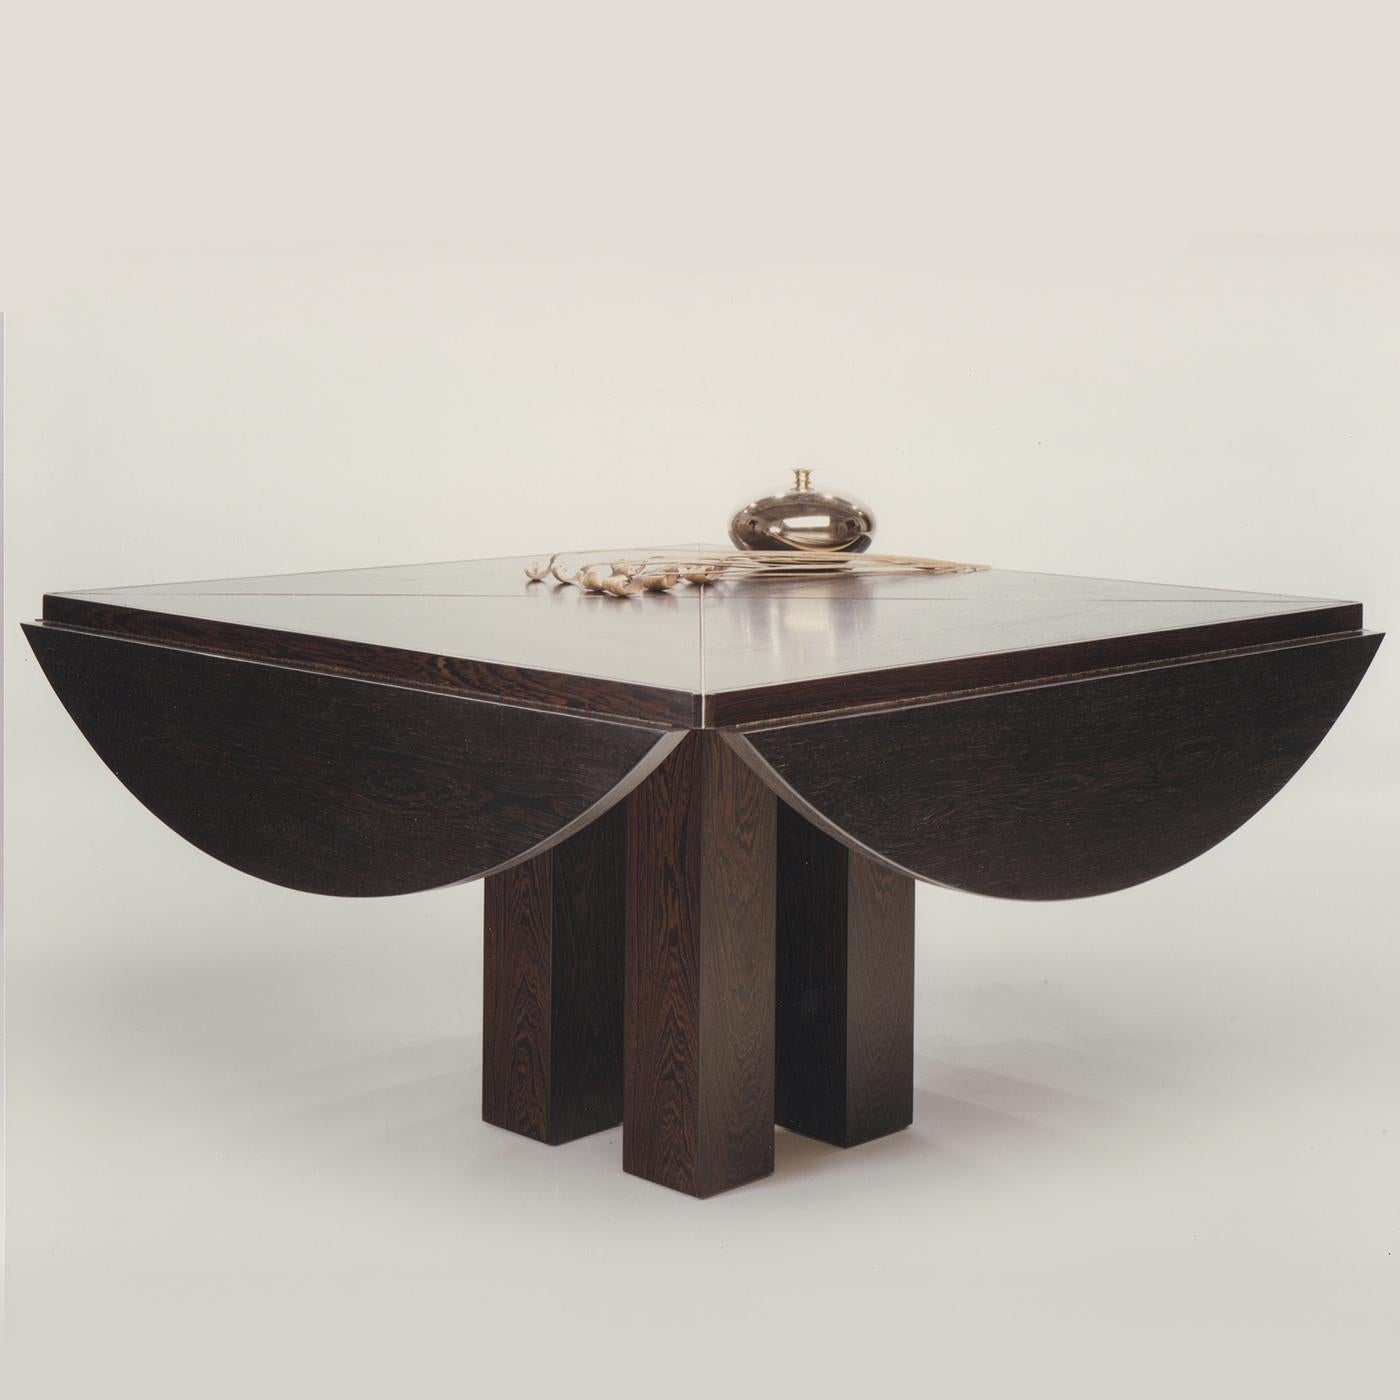 This elegant squared table is extendible and can be made in Italian walnut wood, American dark walnut, maple wood, cherry wood, durmast oak wood, or durmast oak with a wenge color. The solid wood adds elegance and warmth to this piece whose top